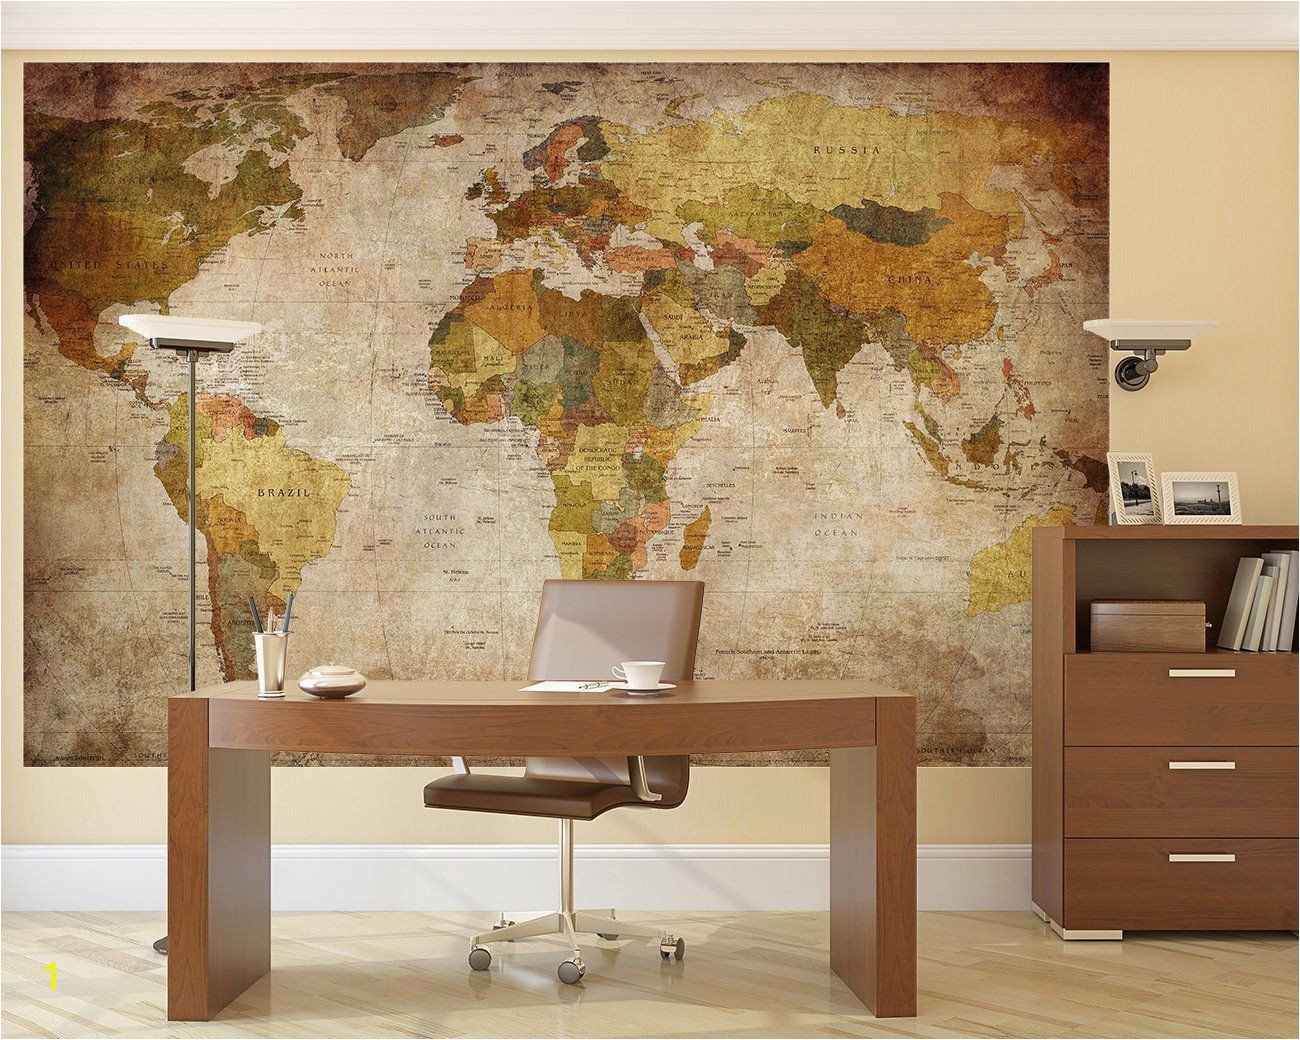 Giant Wall Map Mural Details About Vintage World Map Wallpaper Mural Giant